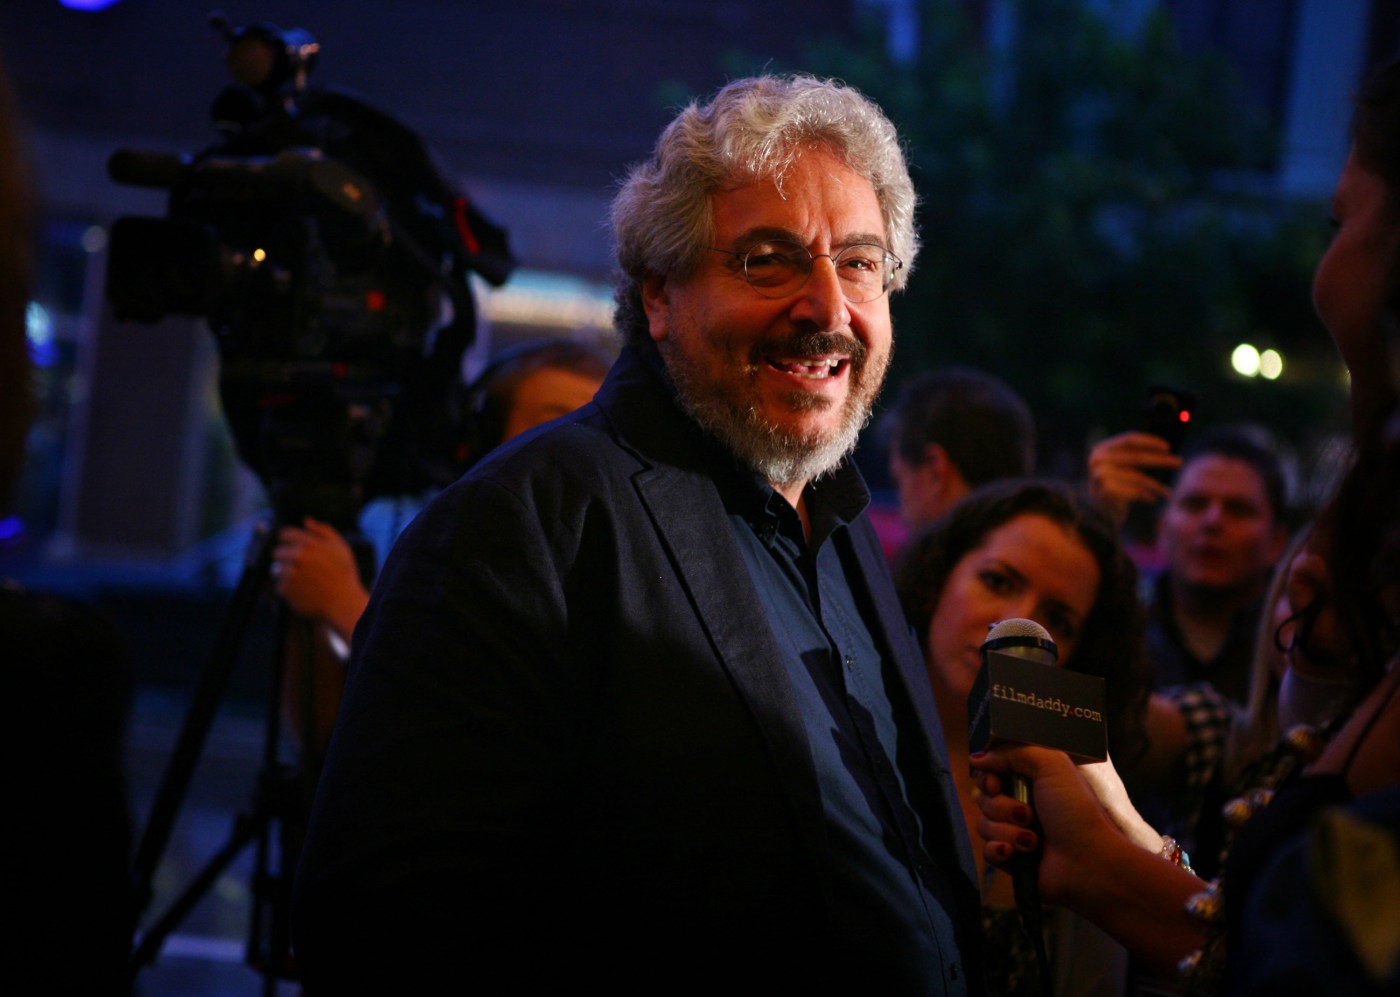 Harold Ramis at the premiere of "Year One" at the Music Box Theatre in Chicago, on June 16, 2009. (E. Jason Wambsgans&mdash;Chicago Tribune/MCT/Sipa USA/AP)